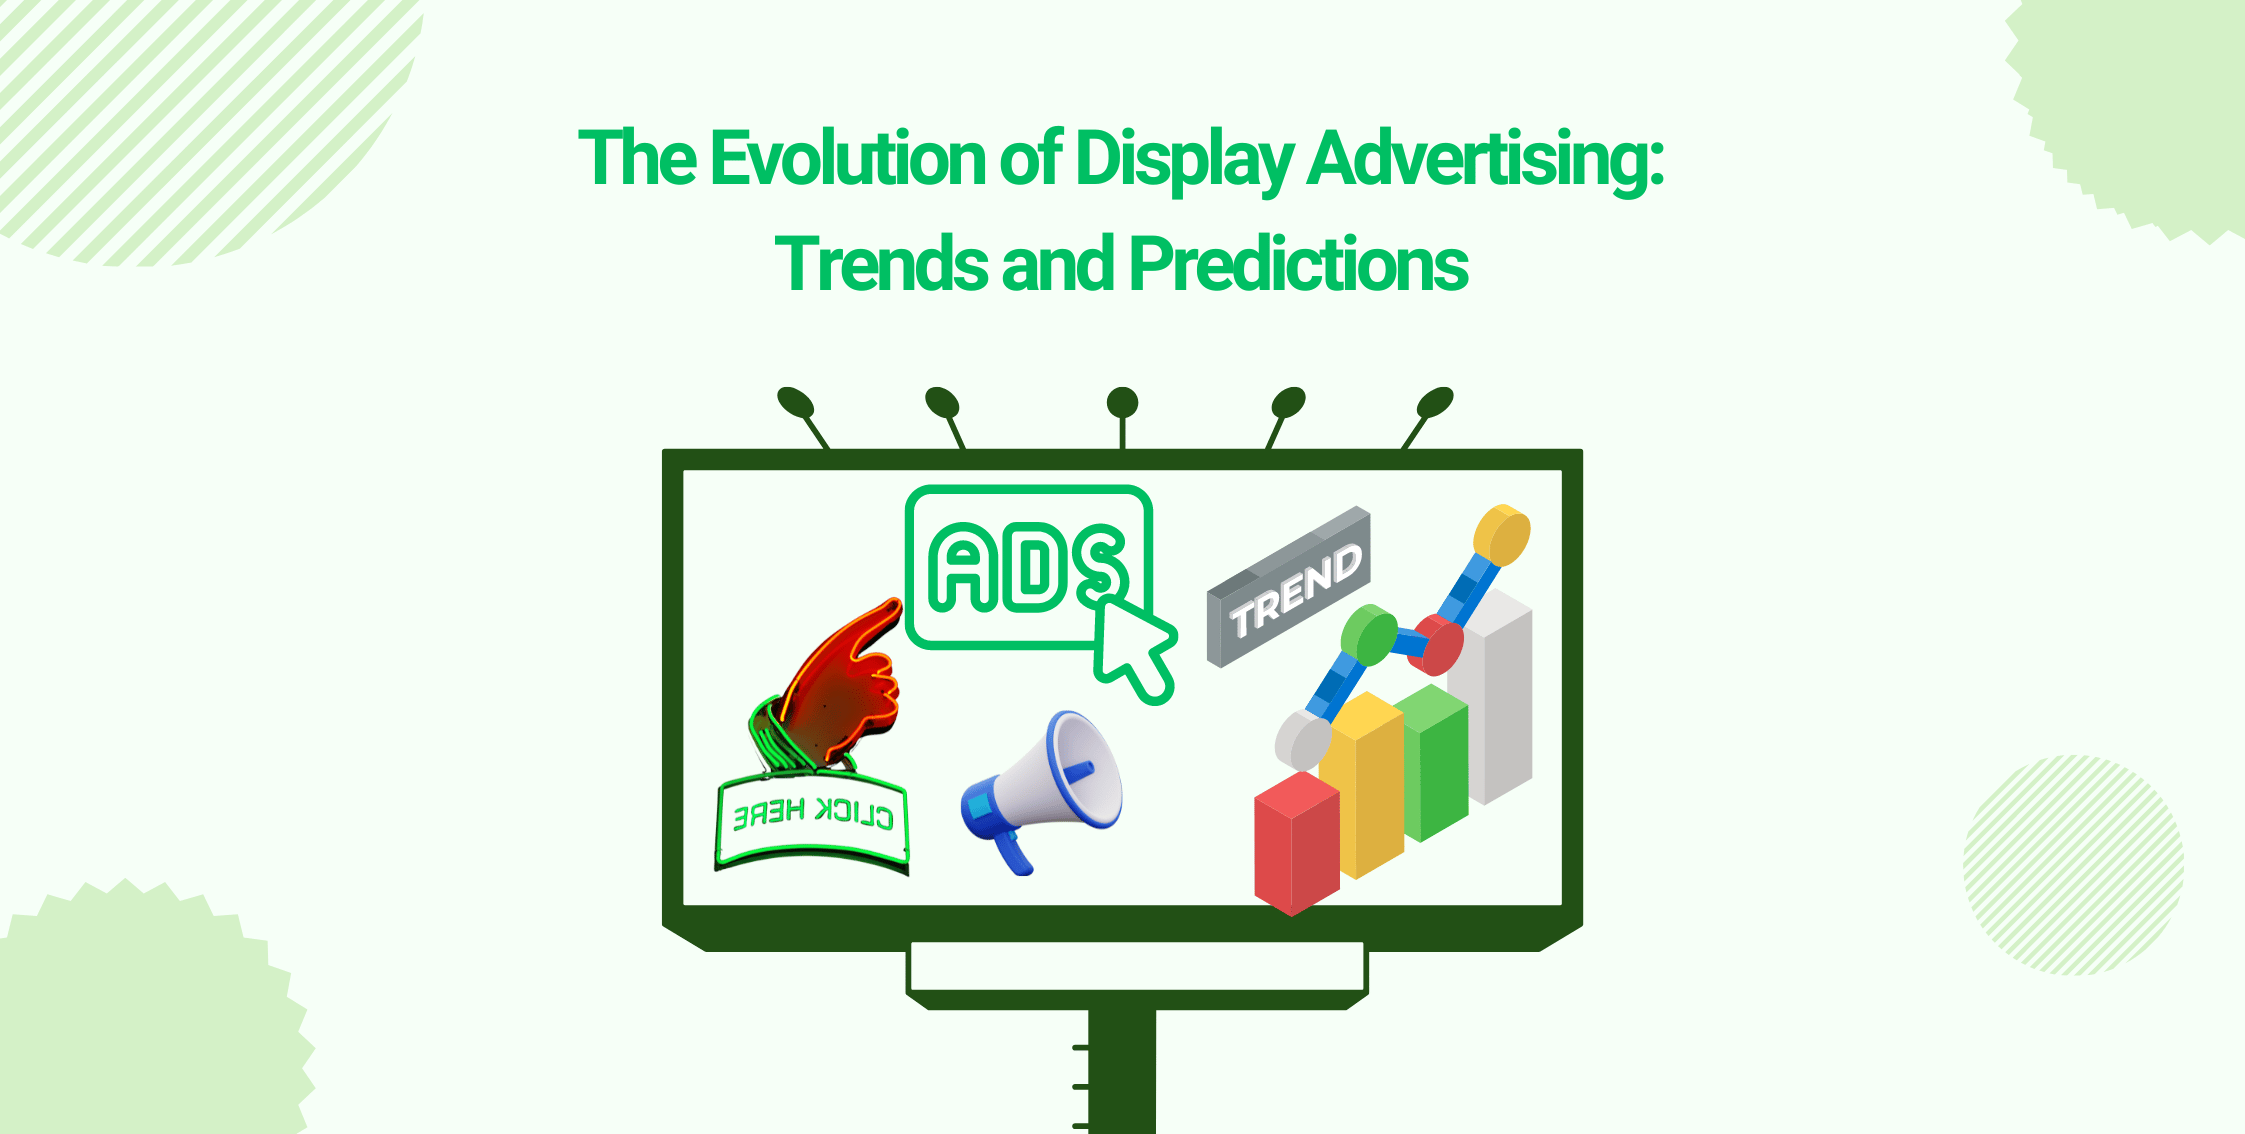 The Evolution of Display Advertising: Trends and Predictions